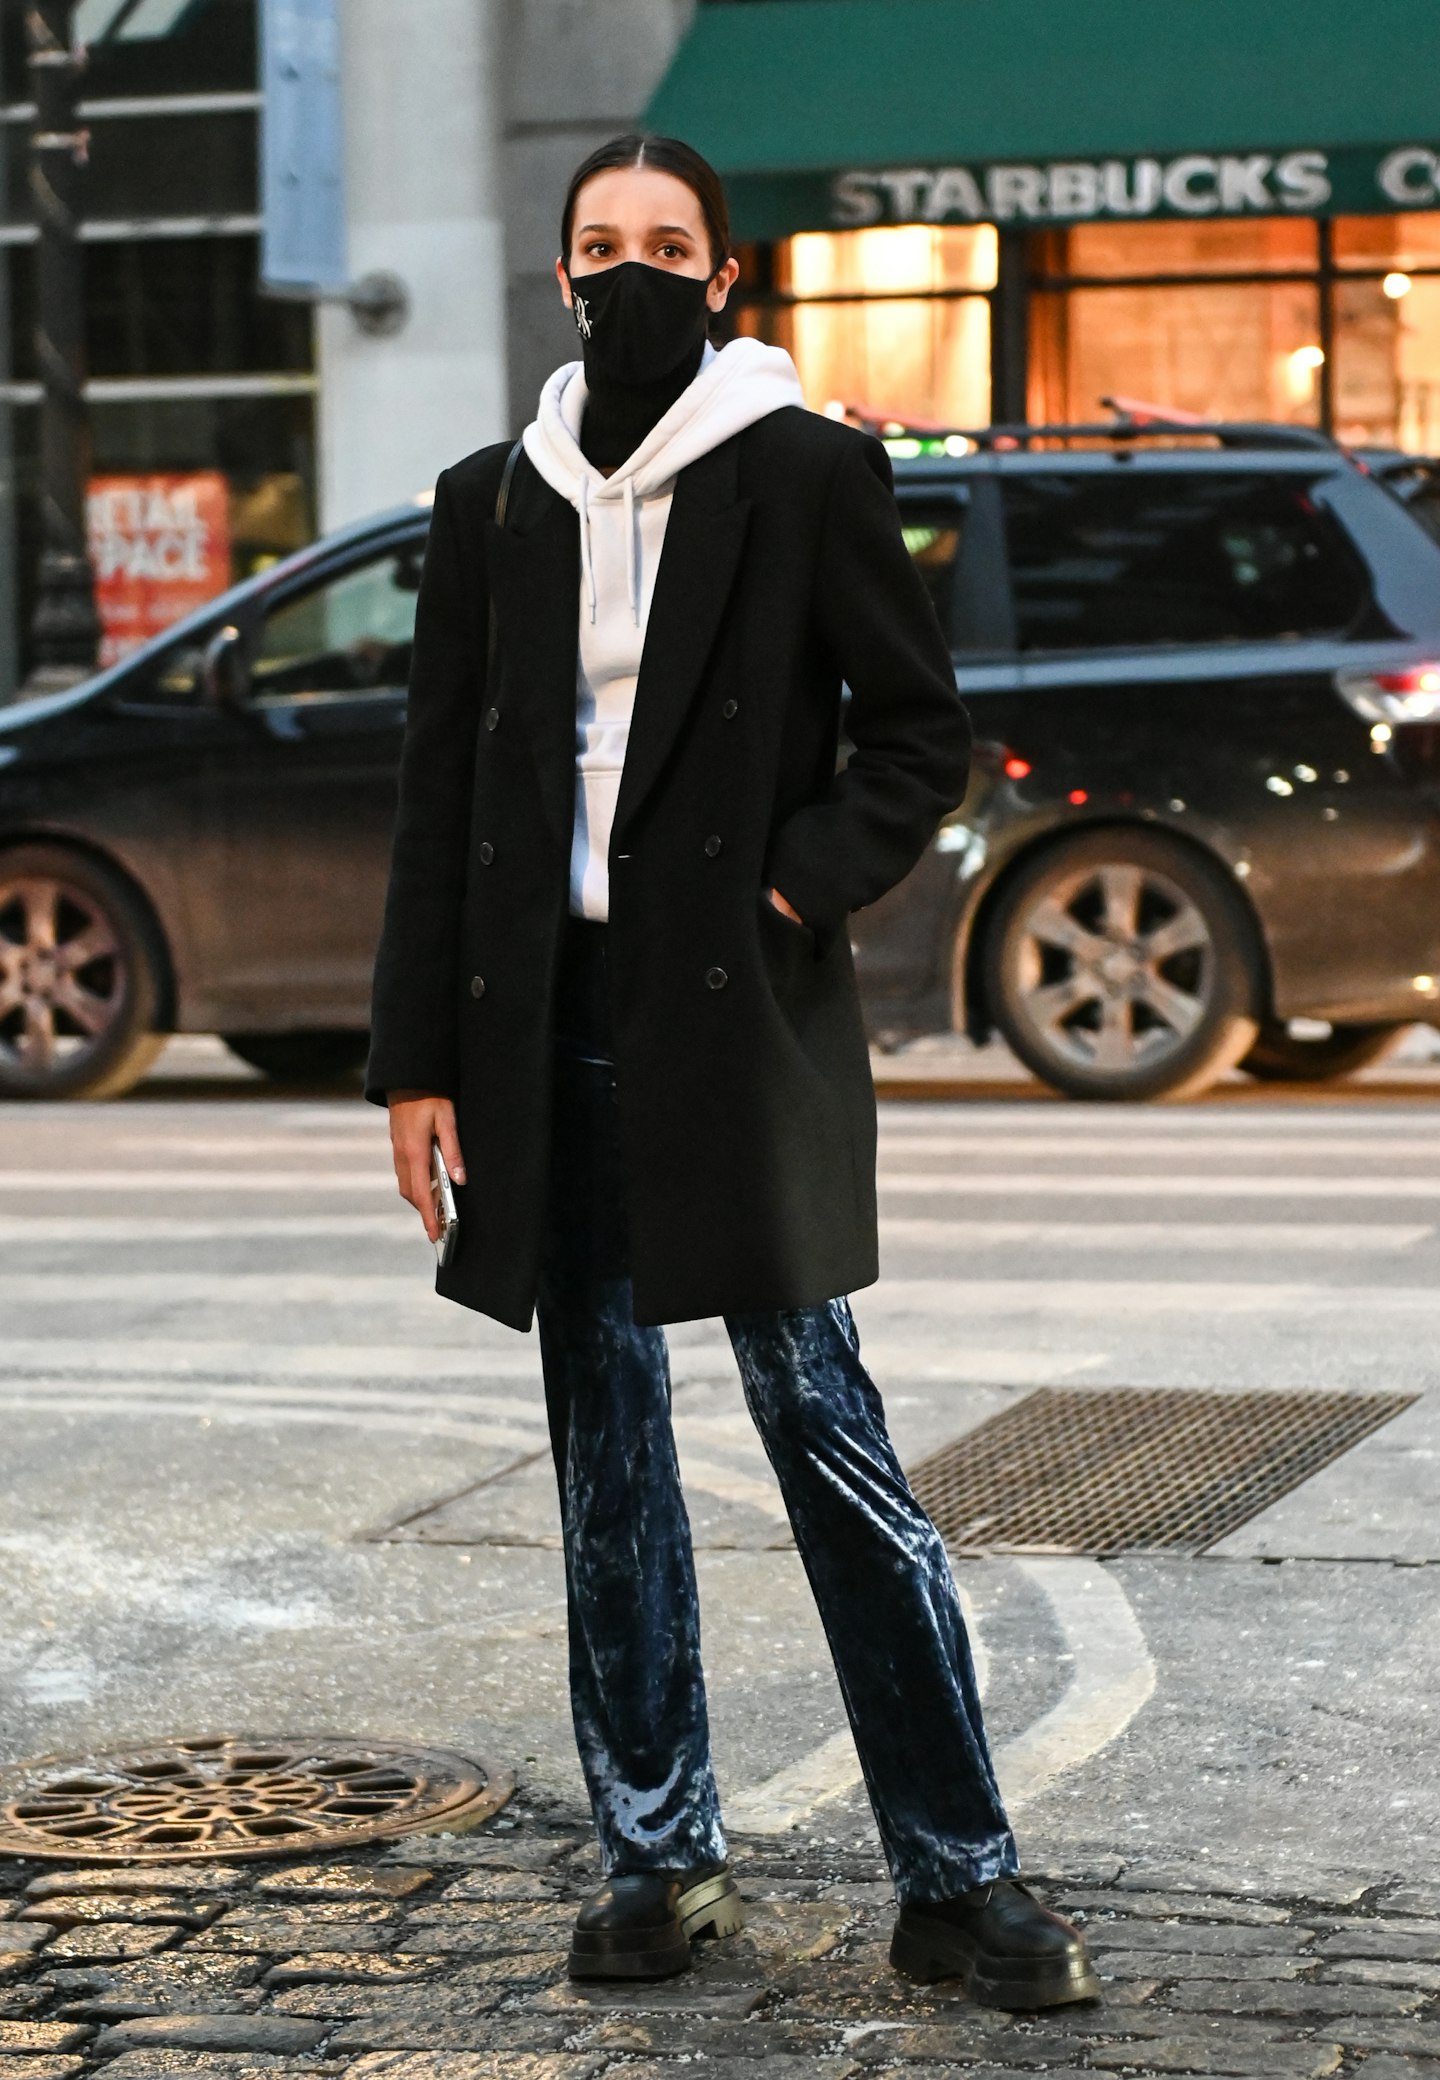 A model wearing velvet trousers at NYFW